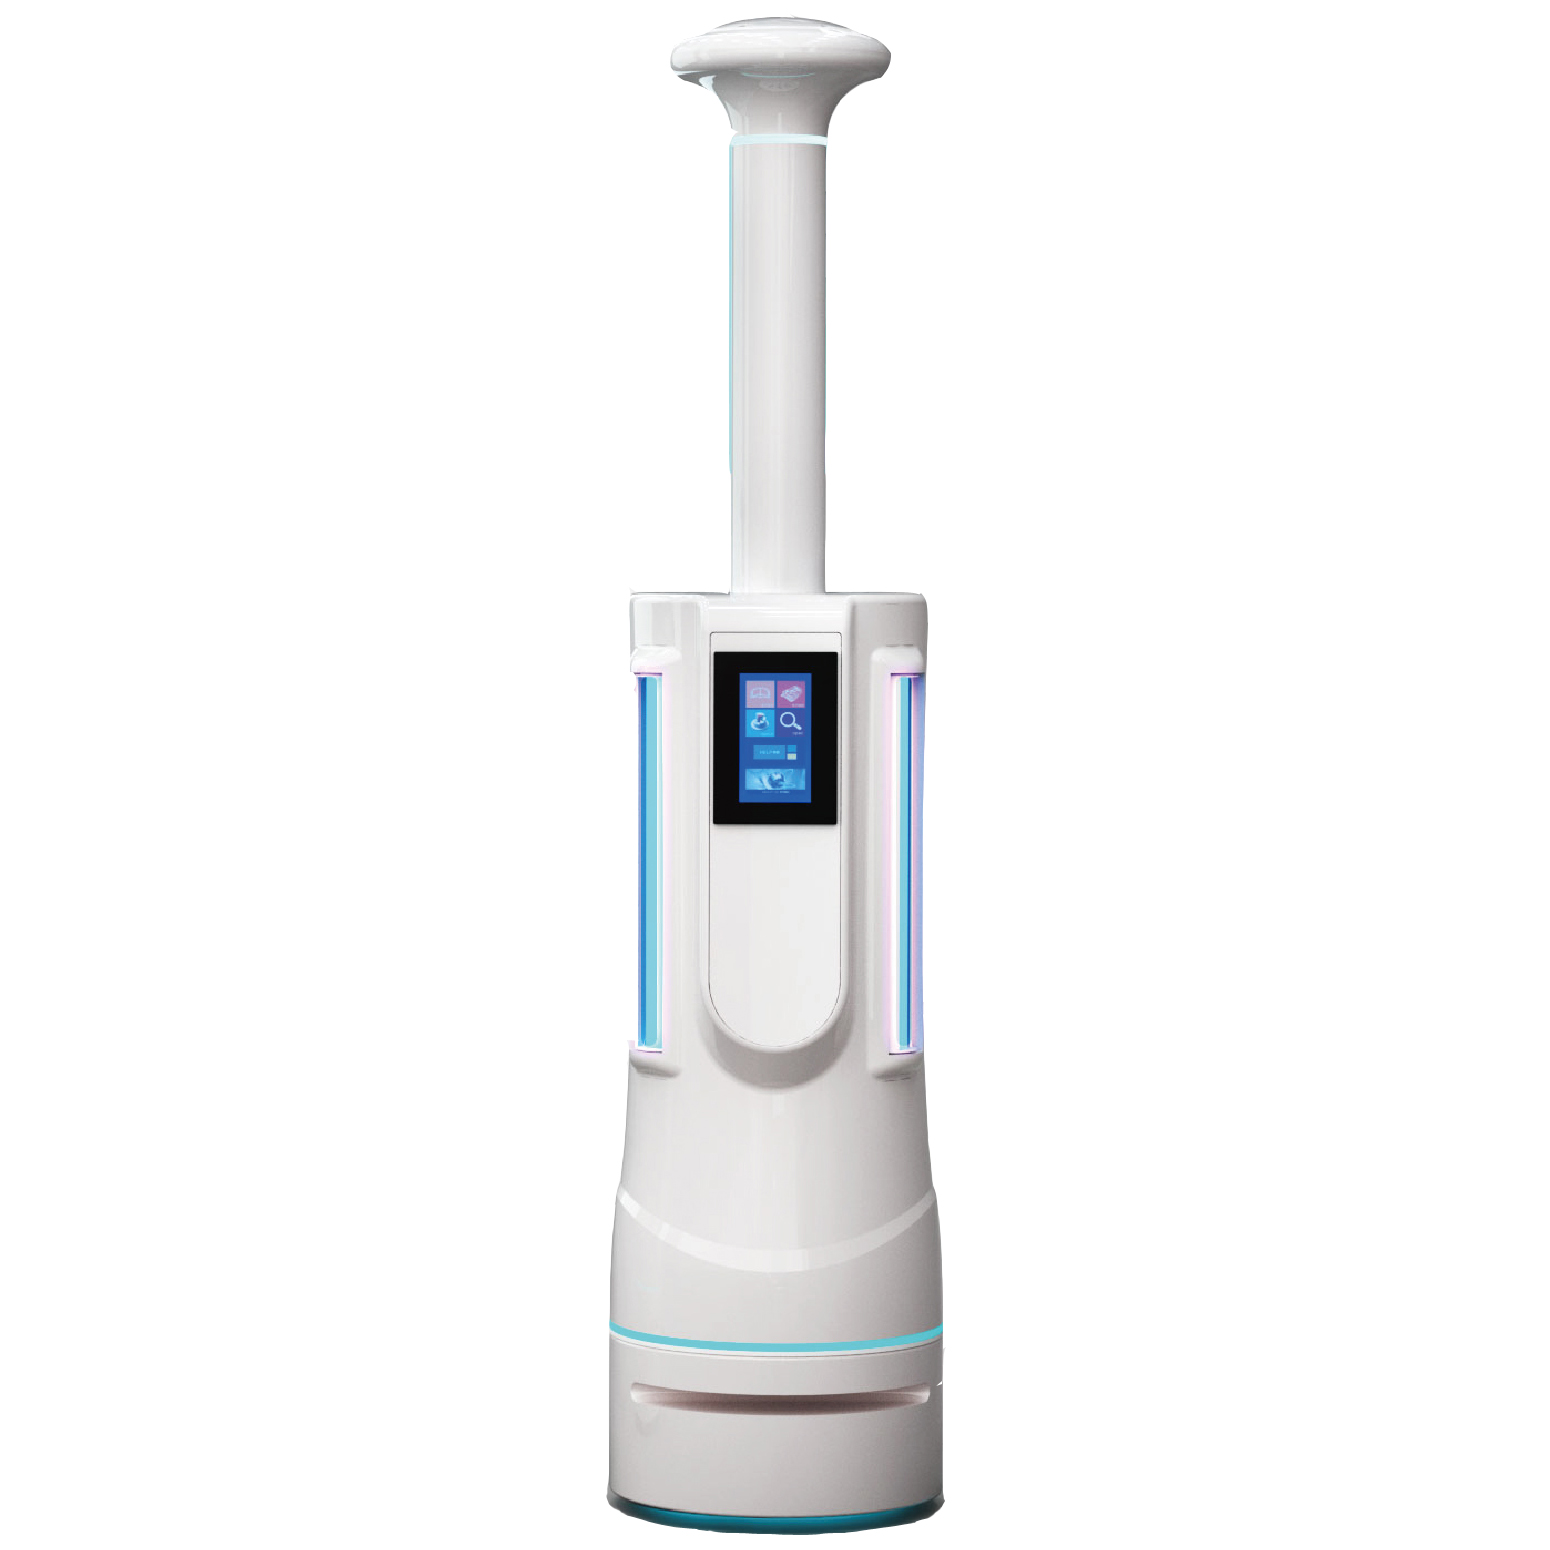 FYB-K3 AI Intelligent Disinfection Robot Cleaner with UV And HOCL Hypochlorous Acid Plasma Air Purifier Hepa Filter